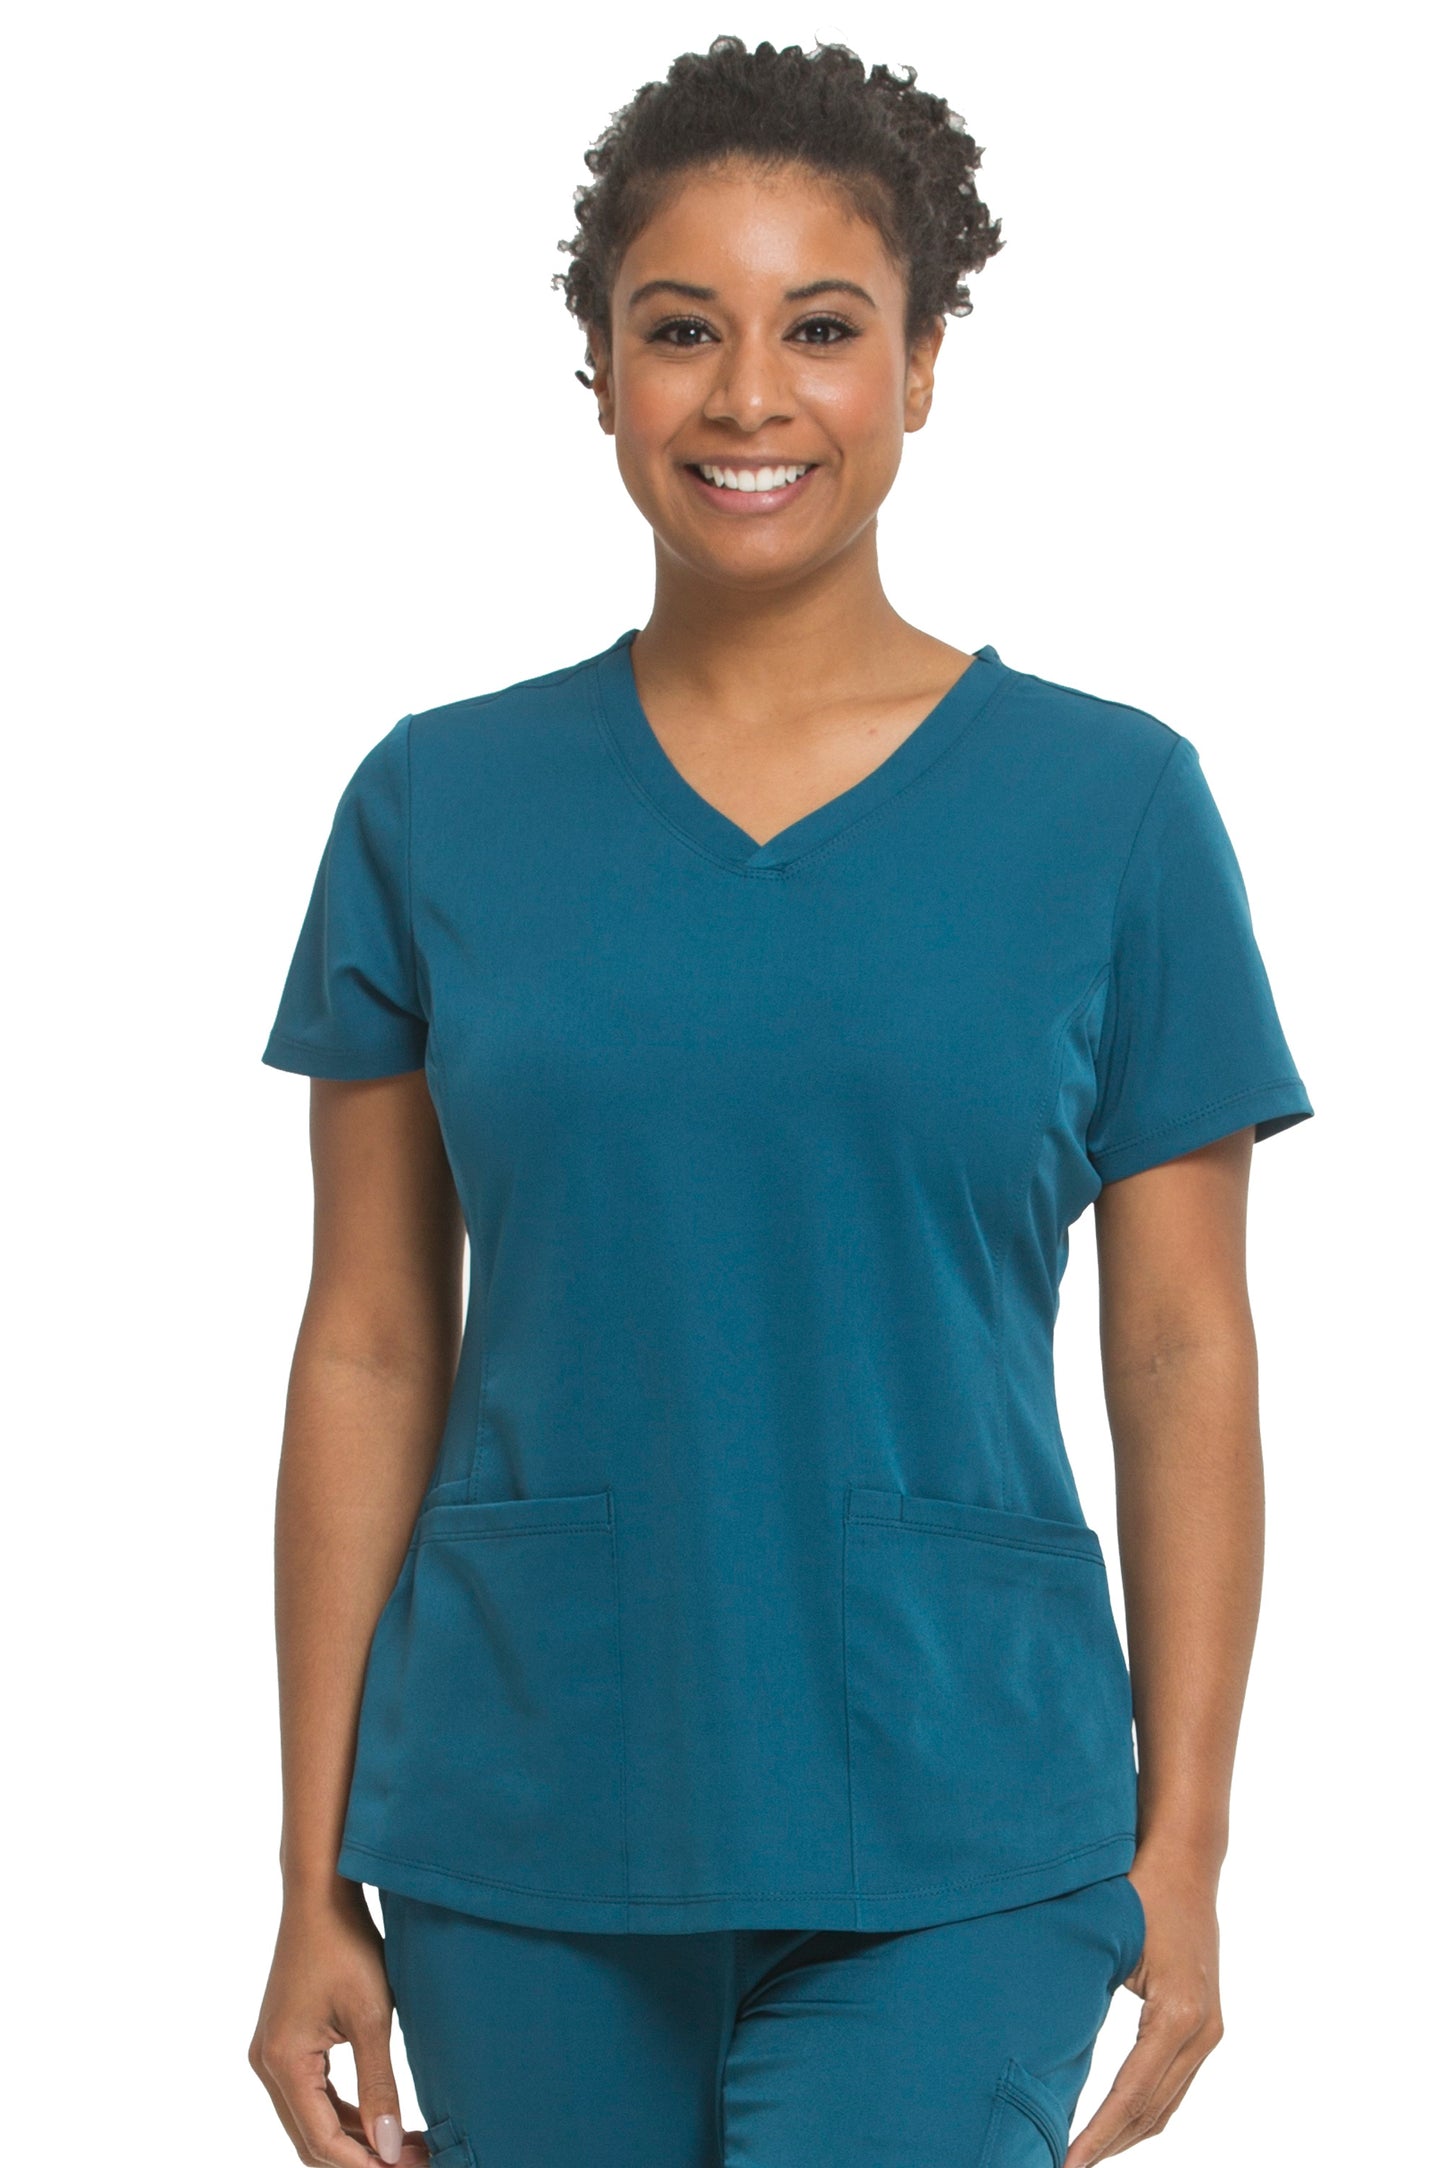 Healing Hands HH Works Monica V-Neck Scrub Top in Caribbean at Parker's Clothing and Shoes